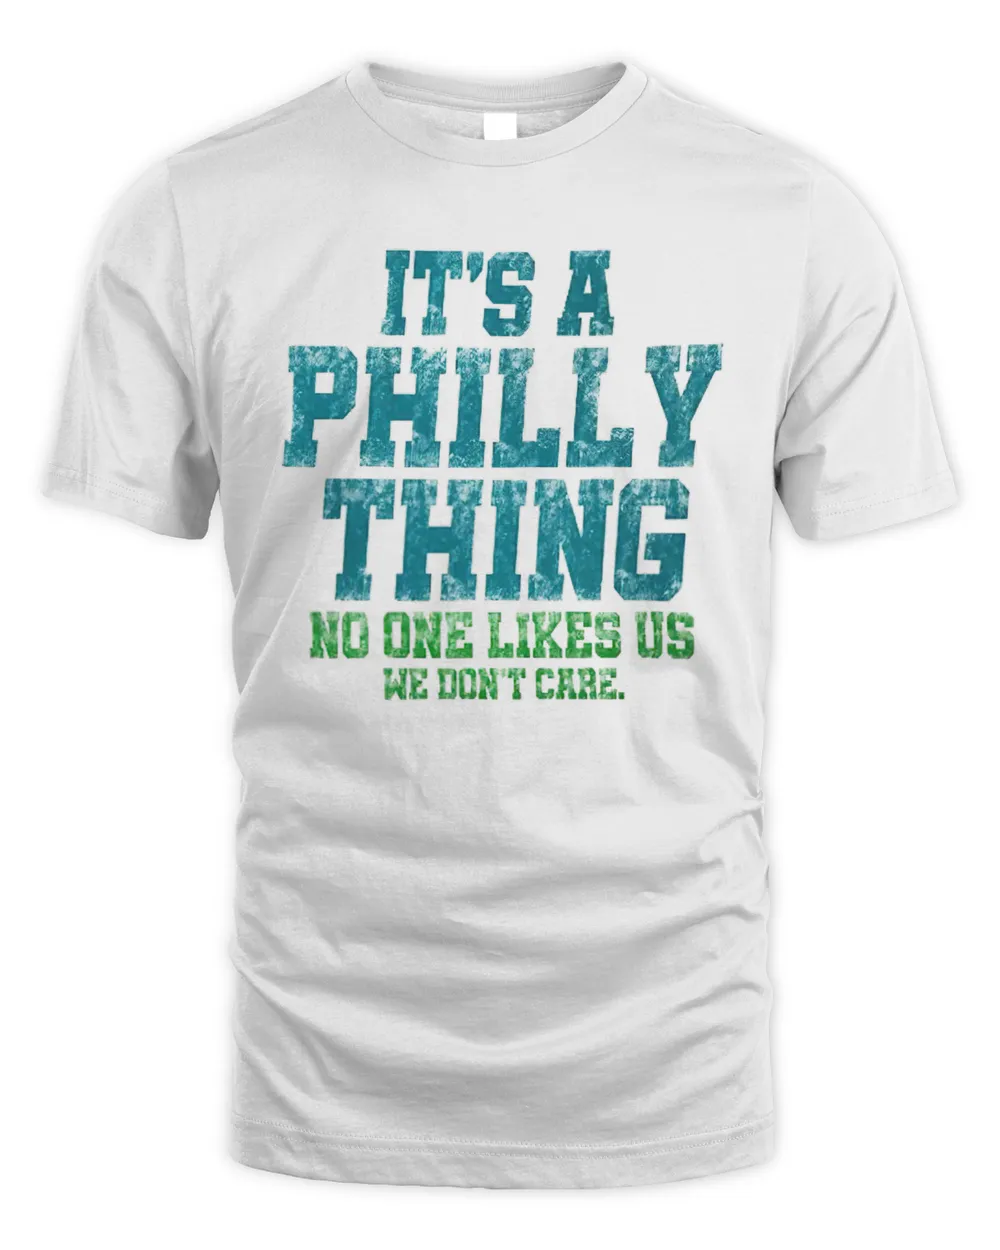 It's a Philly thing no one like us we don't care shirt